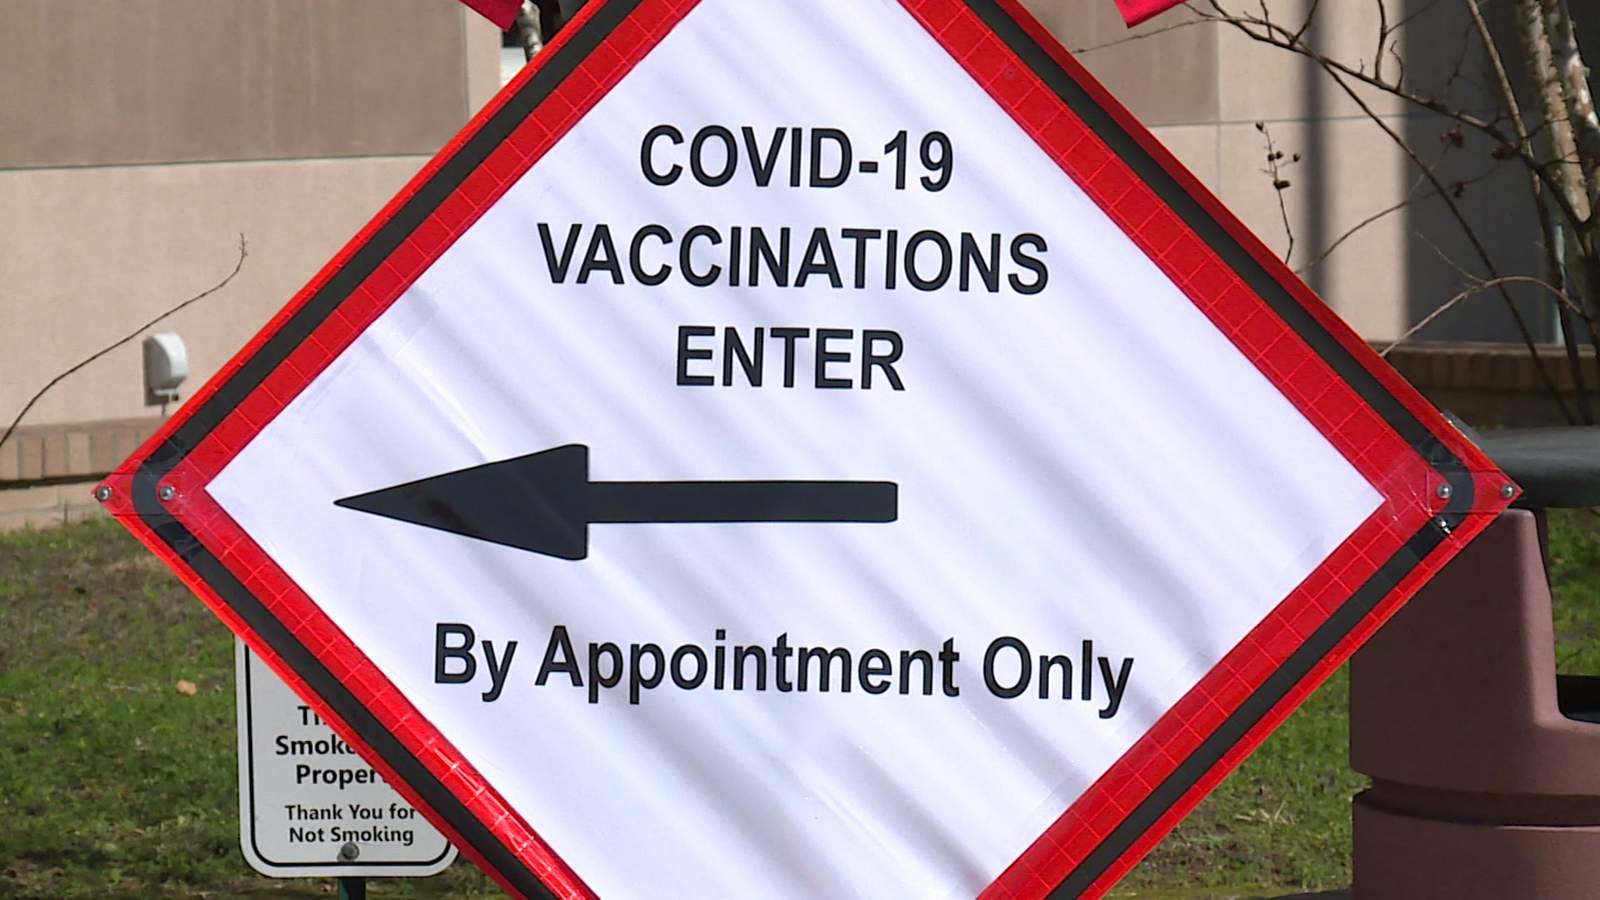 Galveston County officials hope to offer vaccine appointments again soon